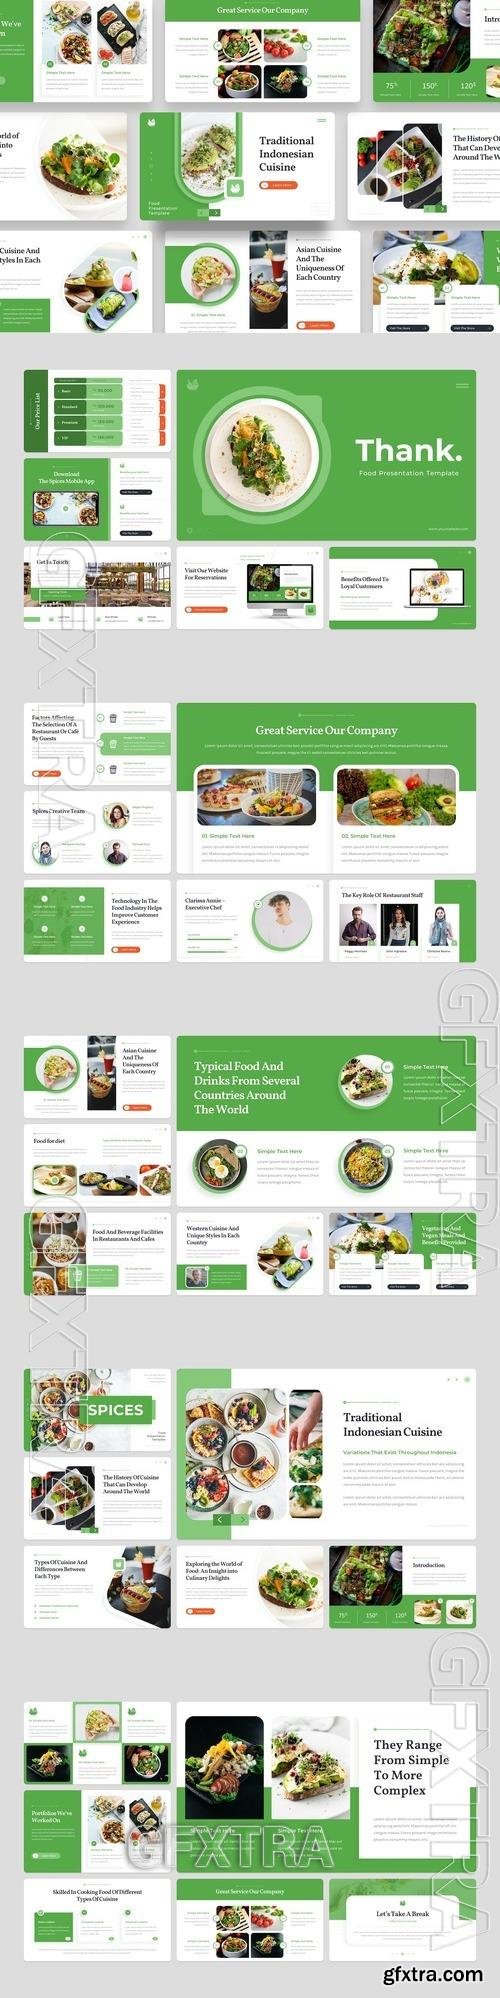 Spices - Food PowerPoint Template 9PWZENK